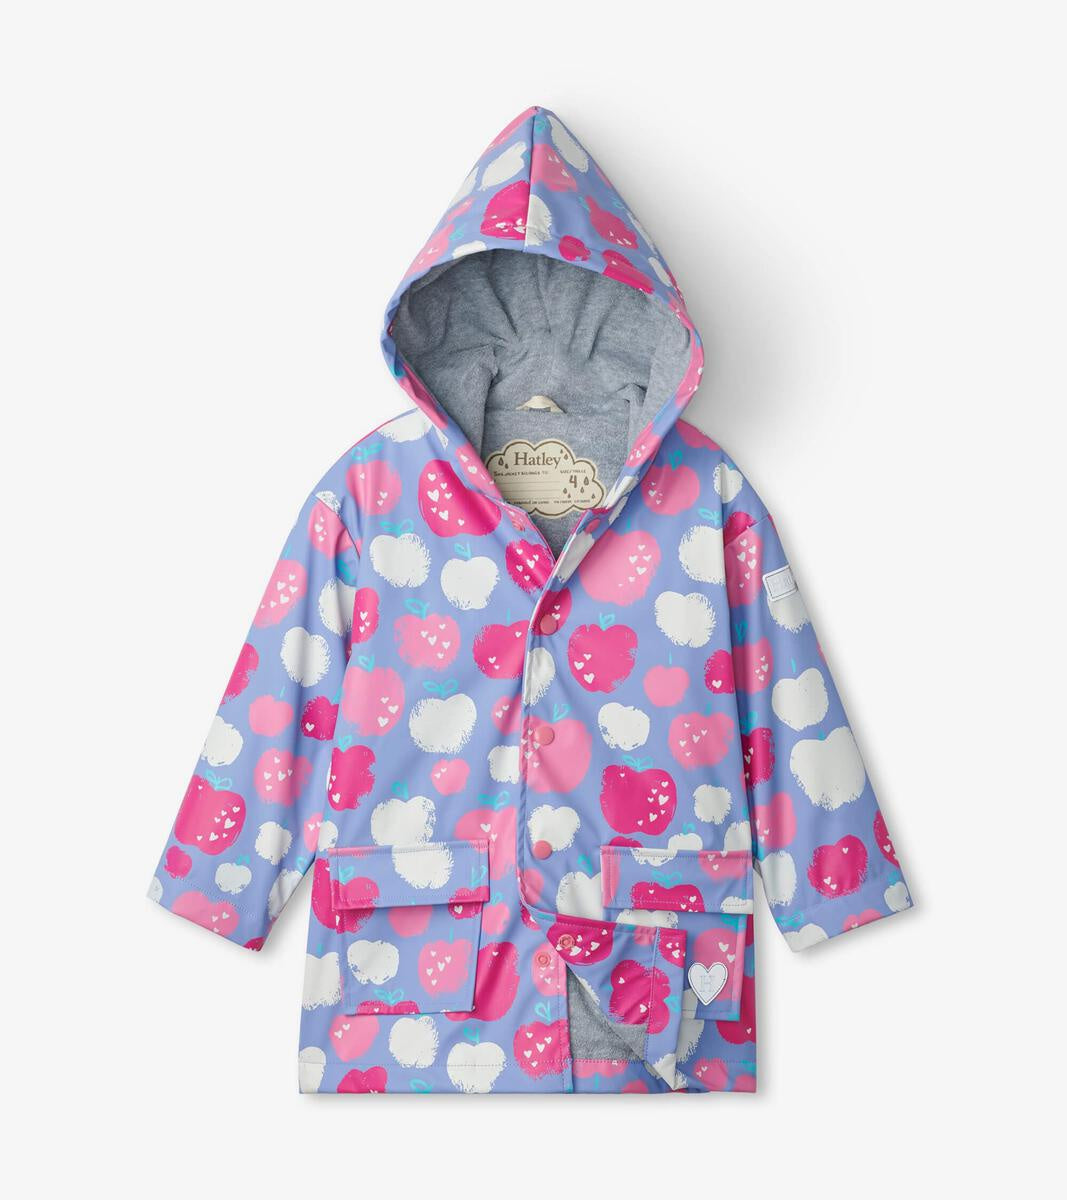 Hatley - Raincoat - Colour Changing Stamped Apples